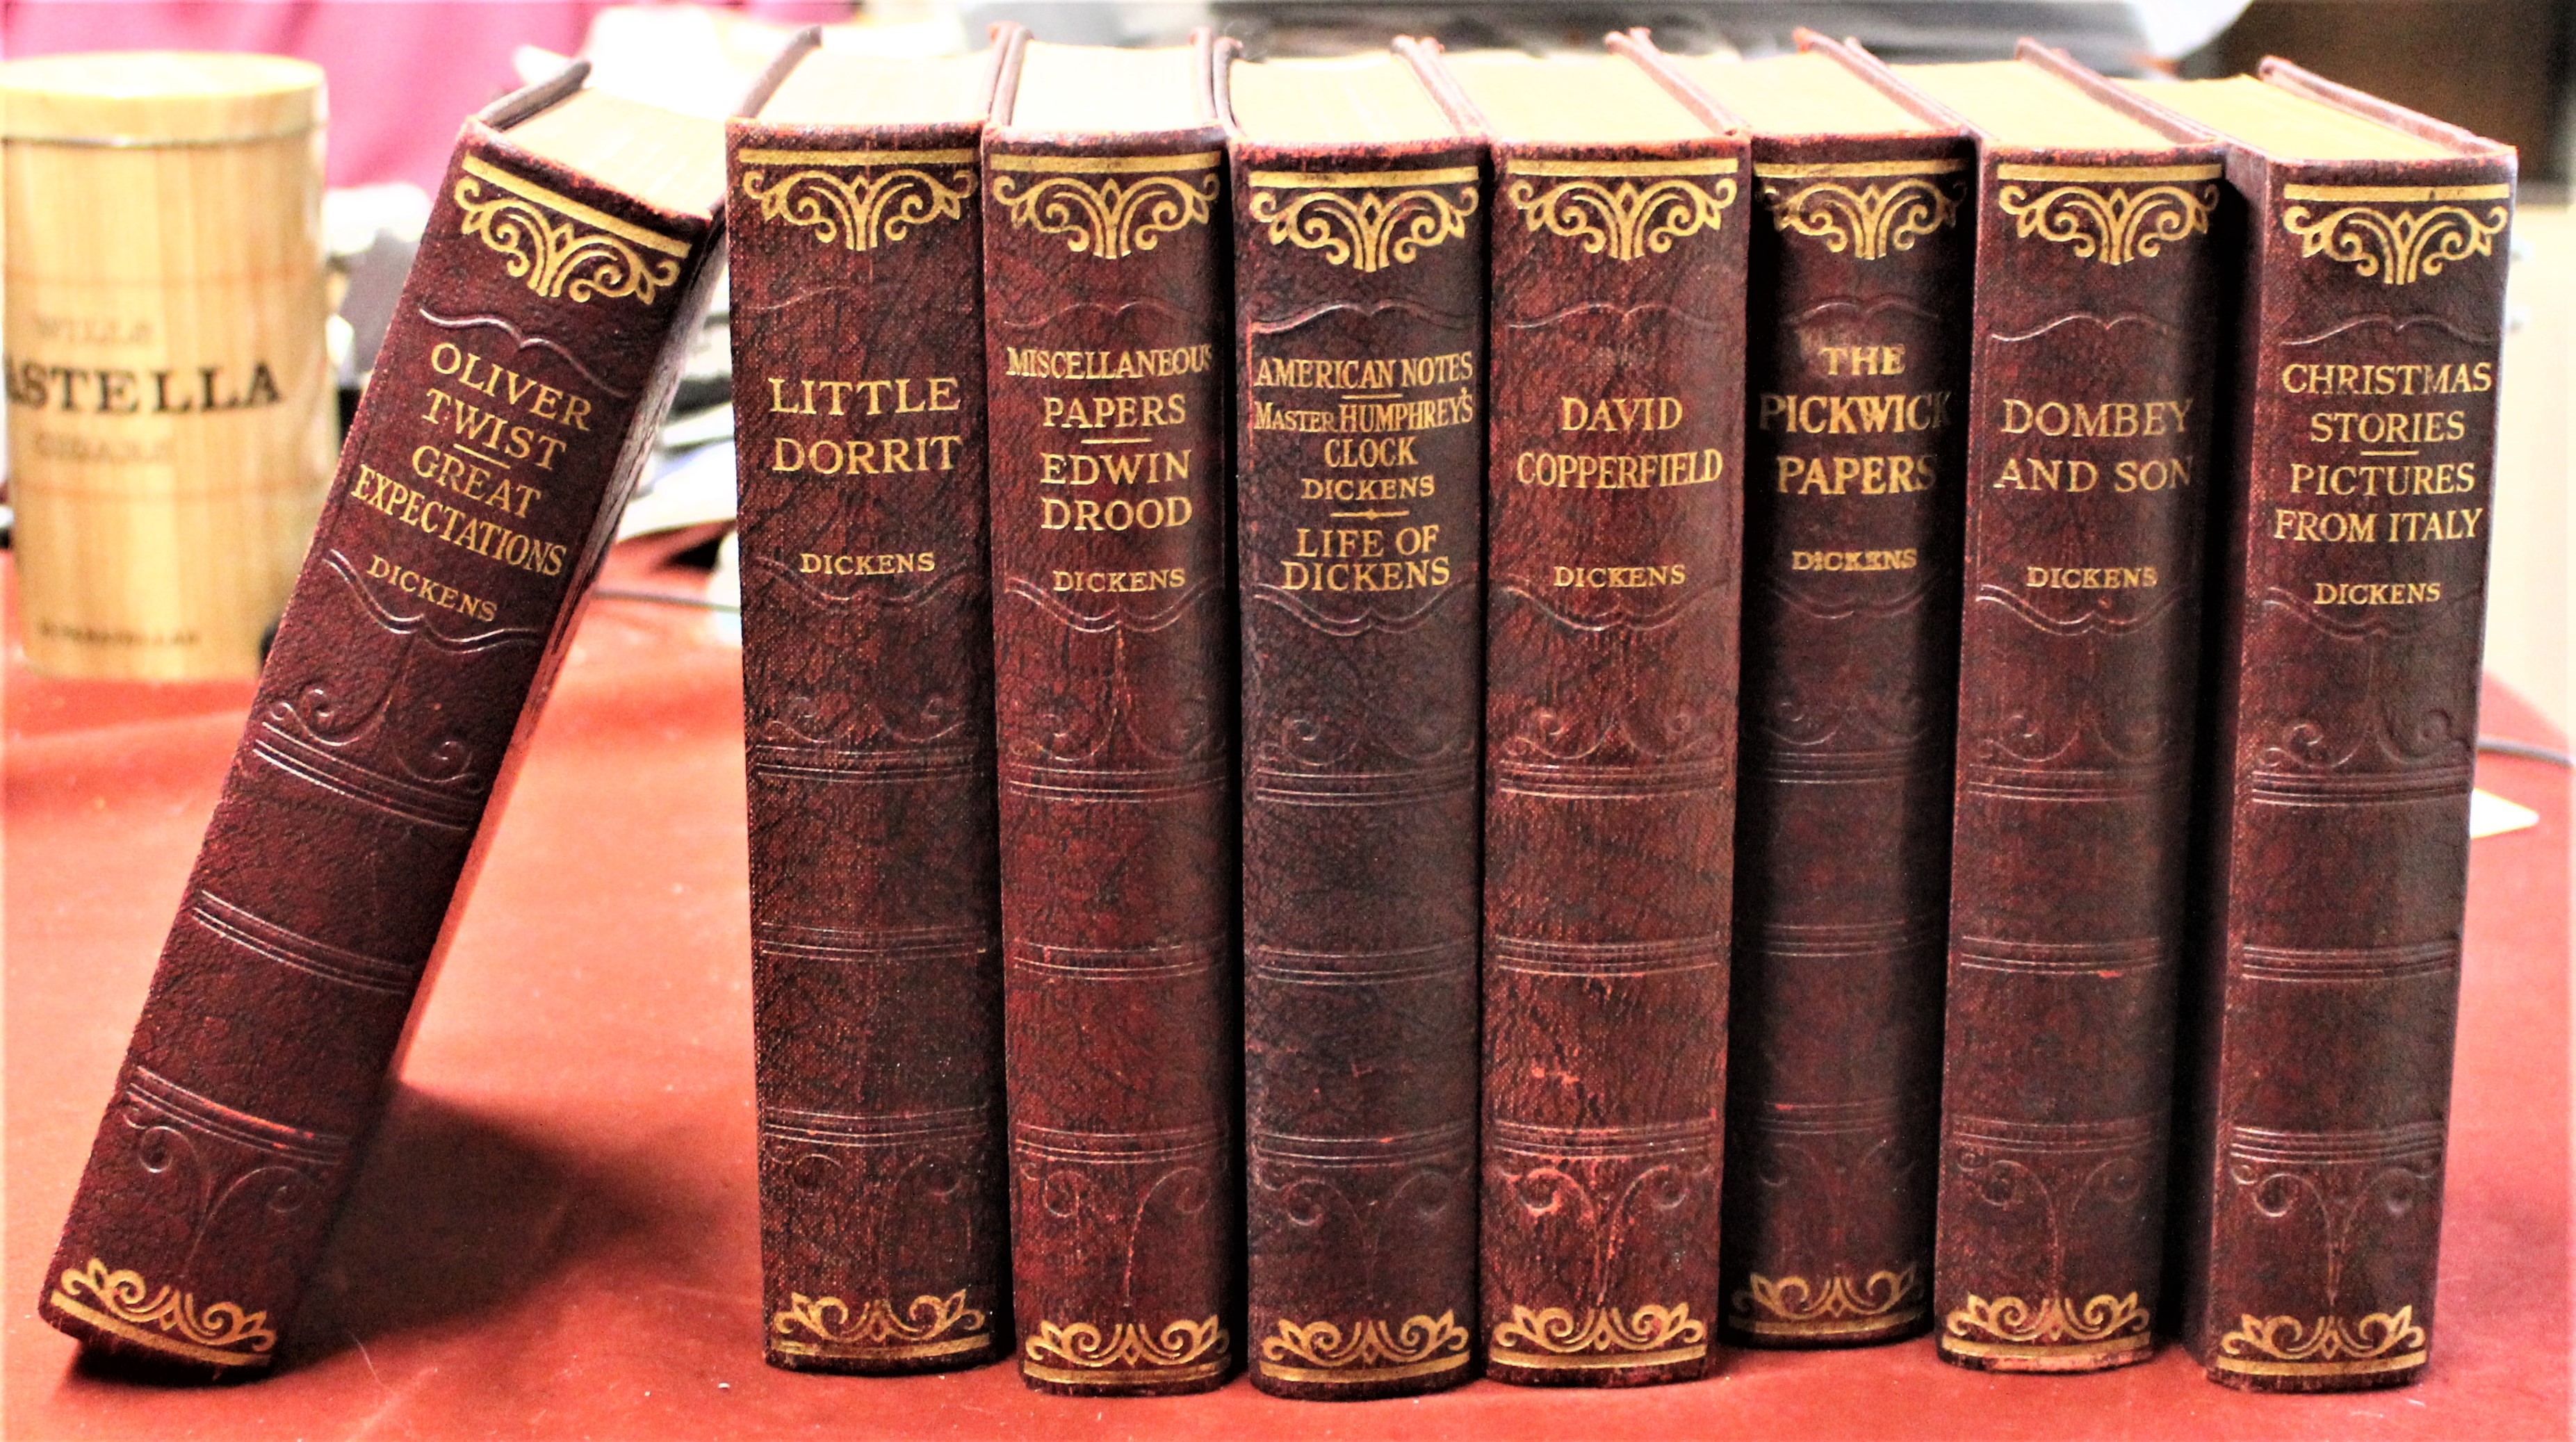 Book-Dickins-Little Dorrit-Oliver Twist Edwin Drood-Life of Dickins-David Copperfield-Pickwick